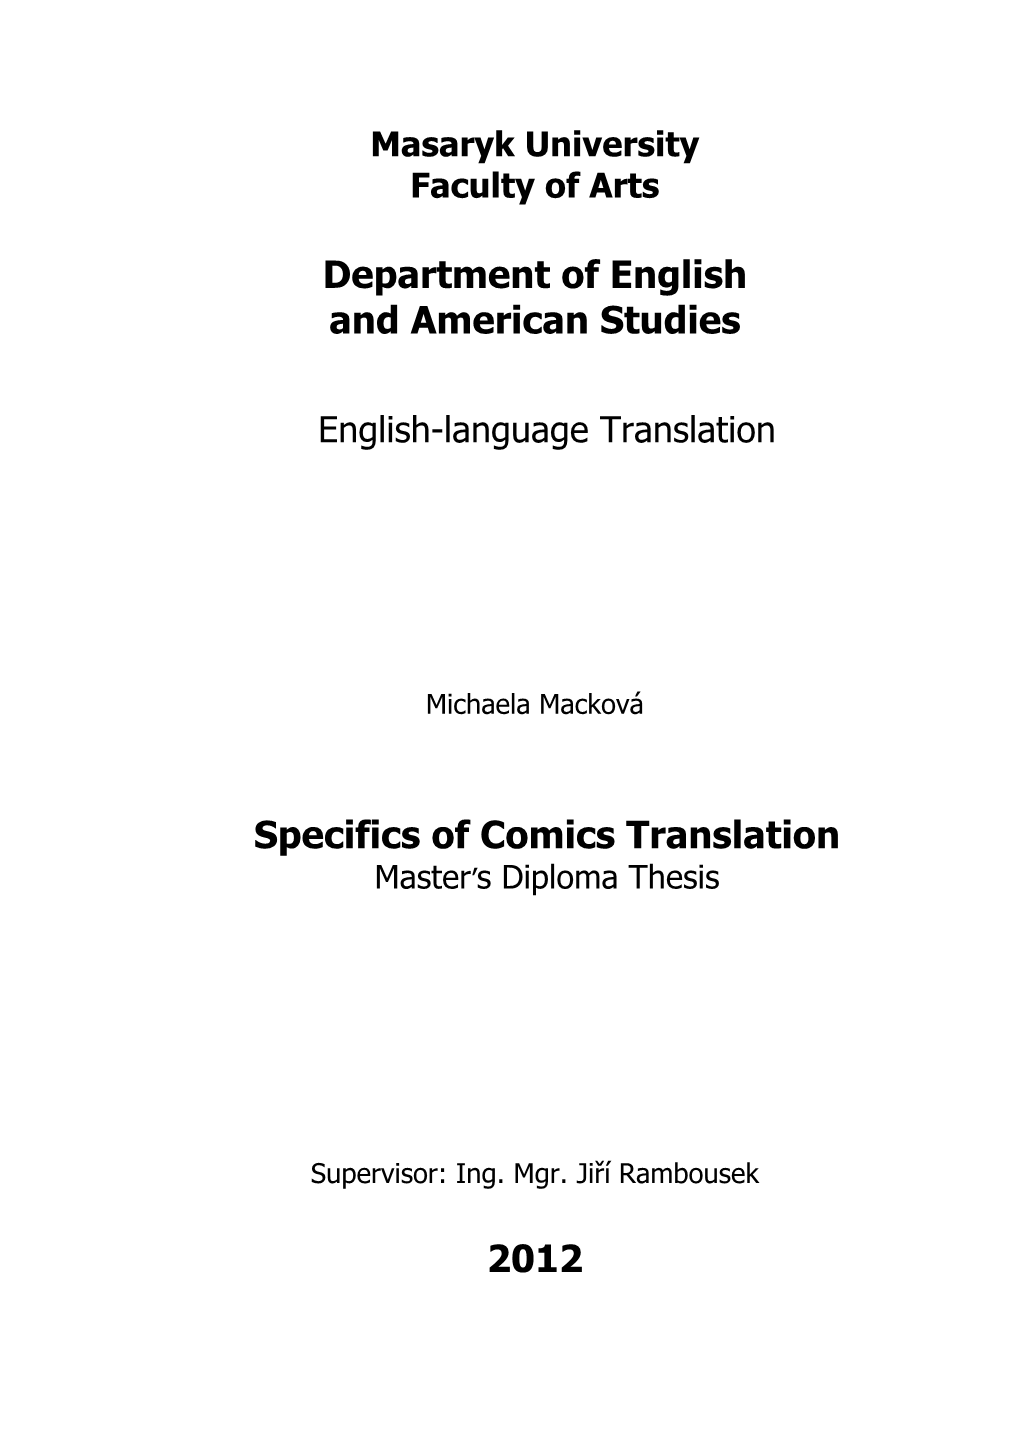 Specifics of Comics Translation Master’S Diploma Thesis